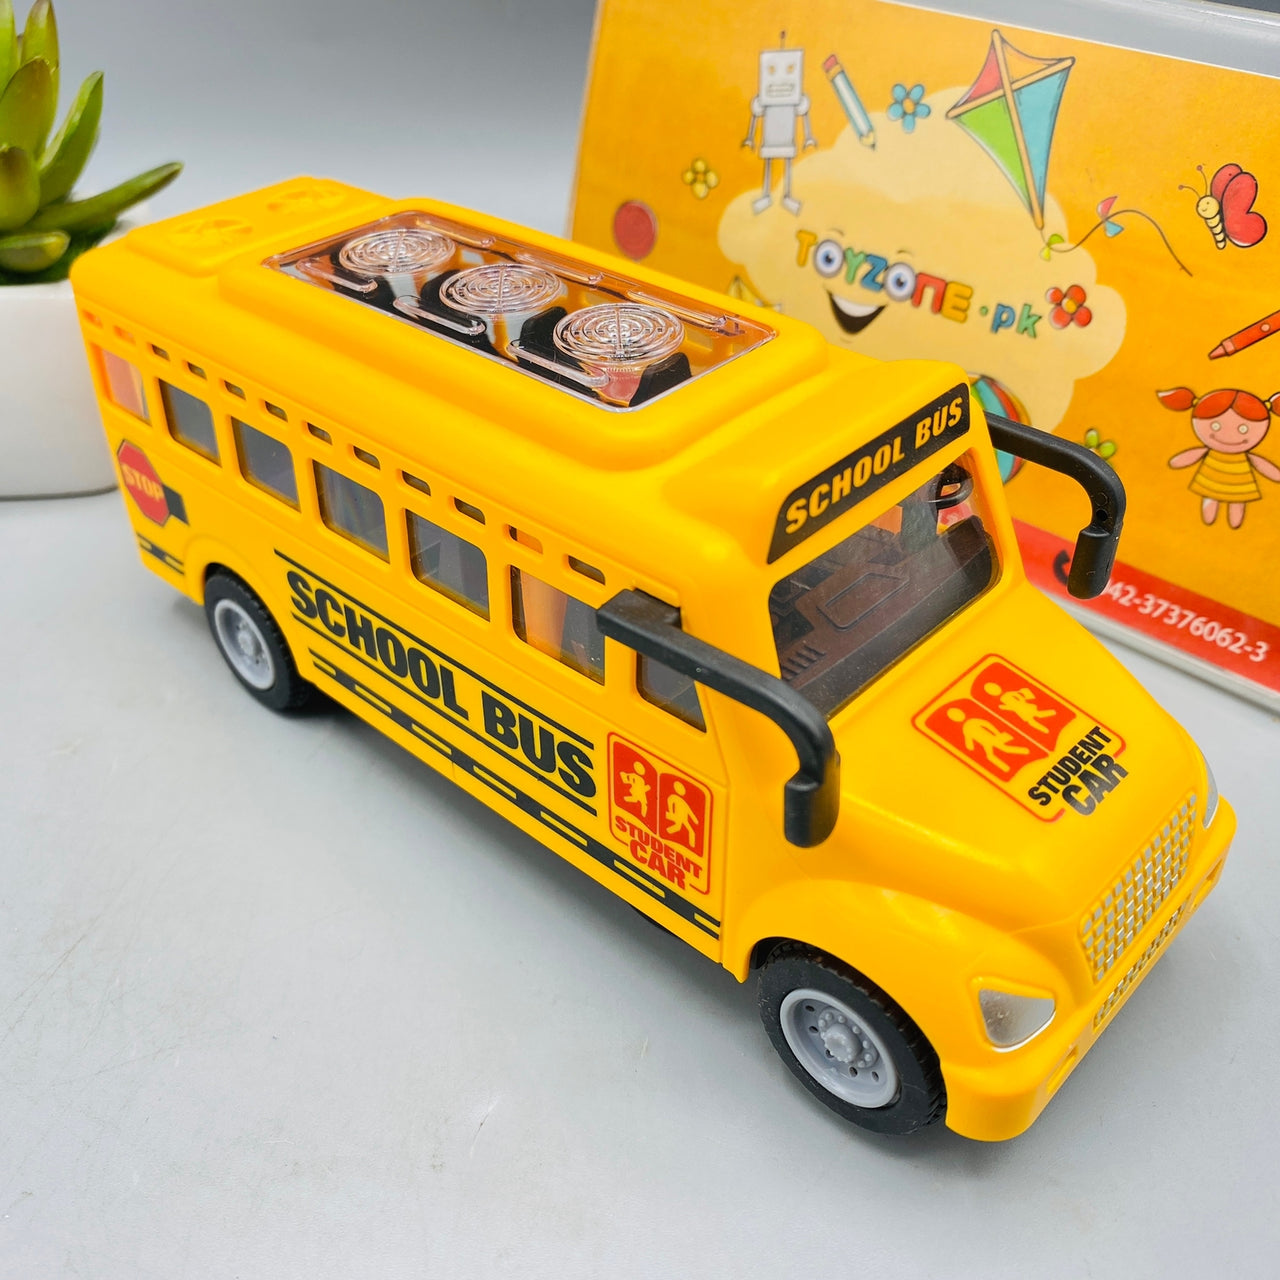 Beautiful School Bus For Childs